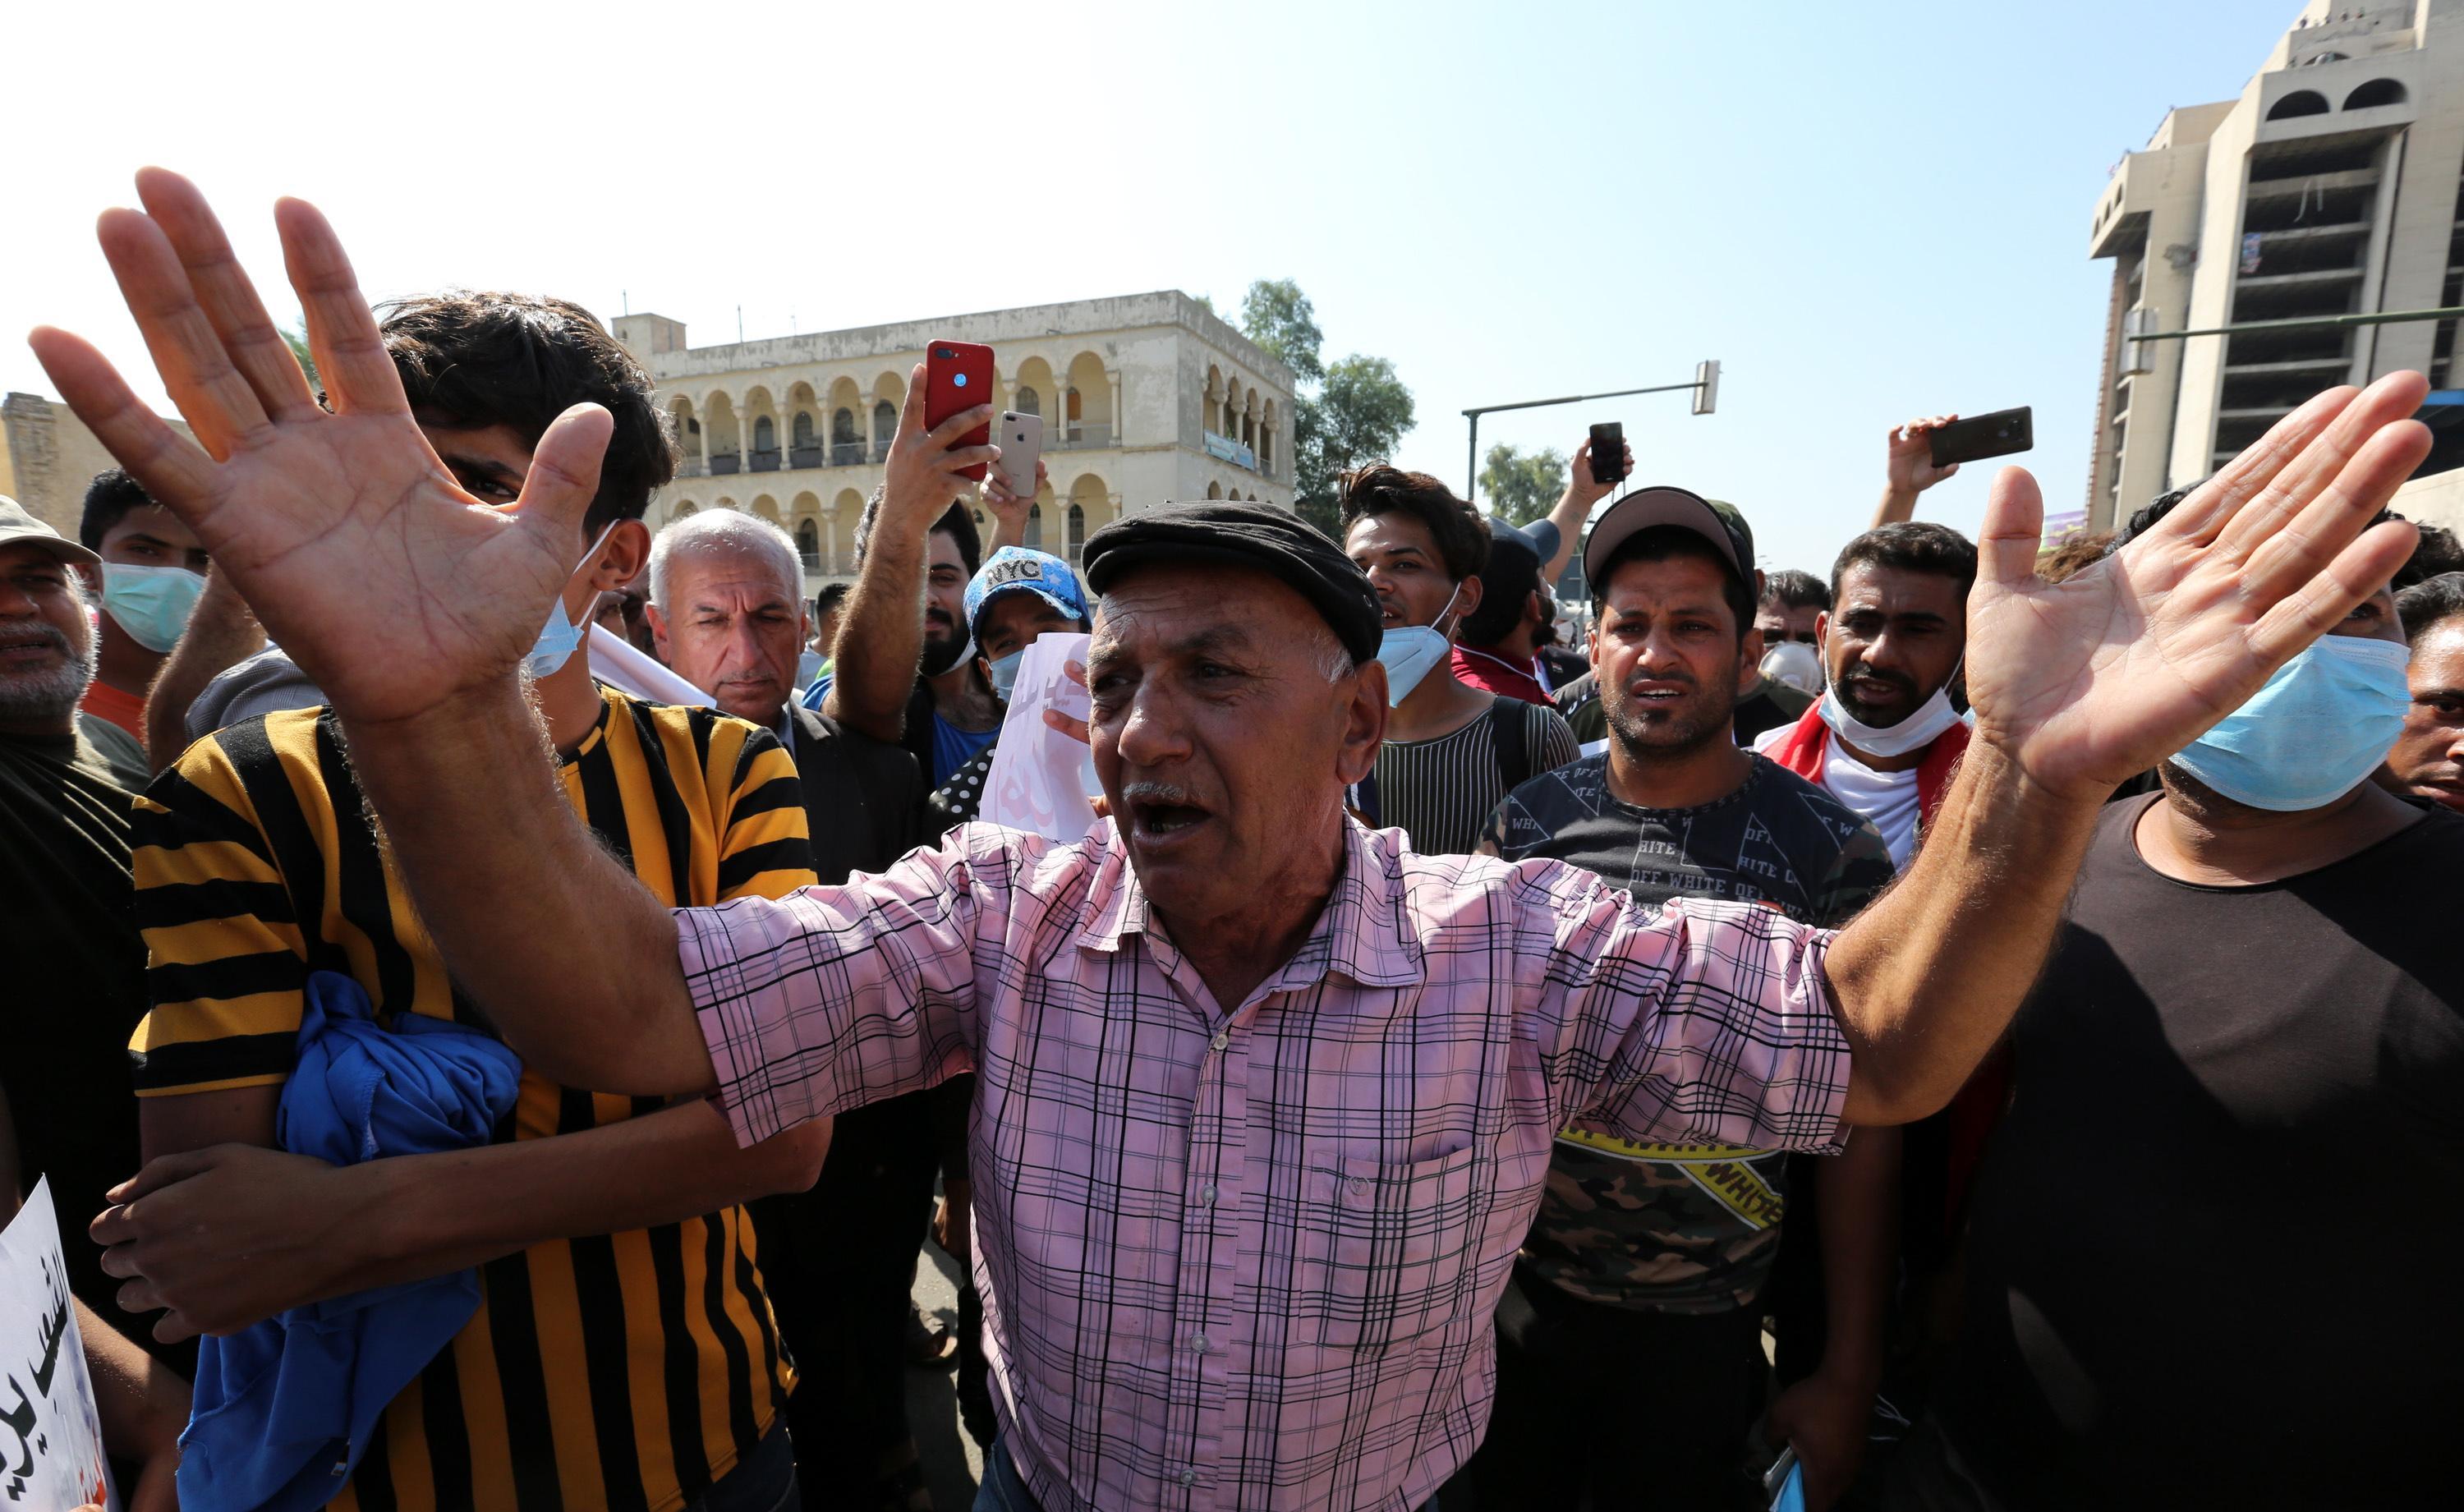 epa07950739 Iraqi protesters chant slogans during protests at Tahrir square in central Baghdad, Iraq, 26 October 2019. According to media reports, at least 40 people died during violence between security forces and people protesting against the government in Baghdad and southern Iraqi cities.  EPA/AHMED JALIL